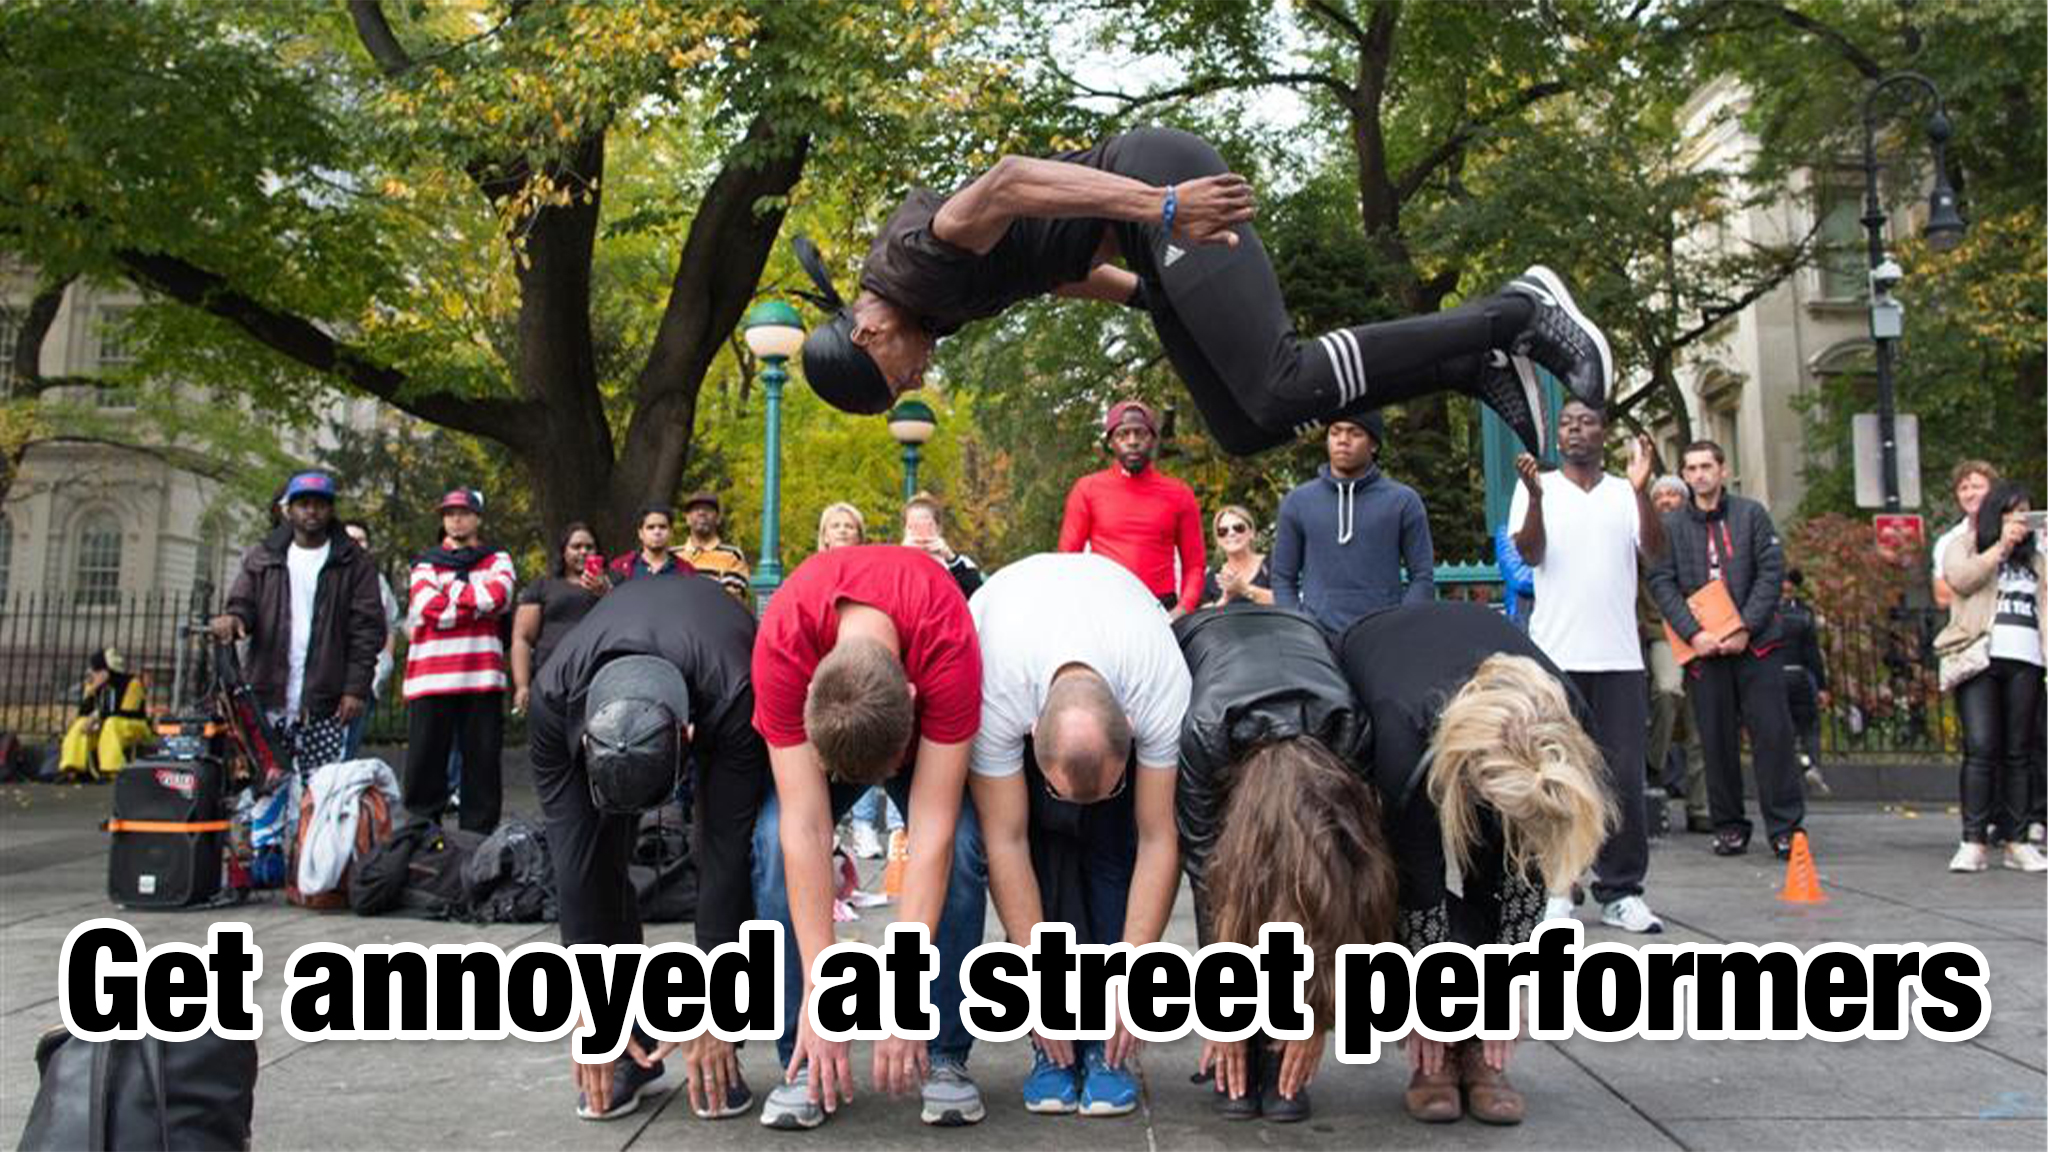 cool pics - Get annoyed at street performers